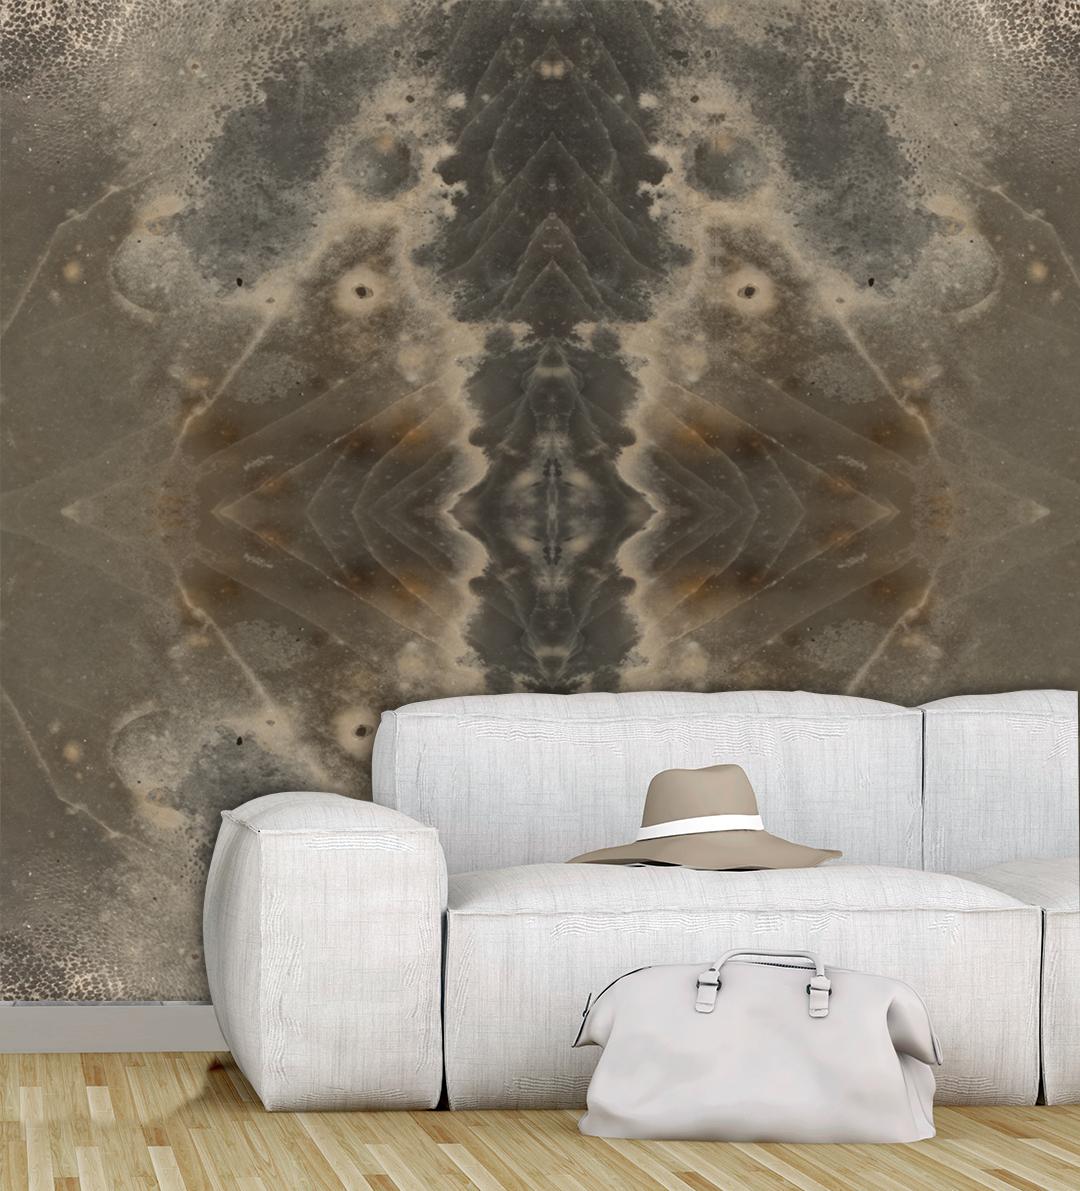 Serpent Shell Mural from our Collection no 5,  inspired by seashells, reflects the tranquility, natural beauty, and calmness of the seashore. The layers of neutral tones create a depth and texture evoking the different shades and patterns found in